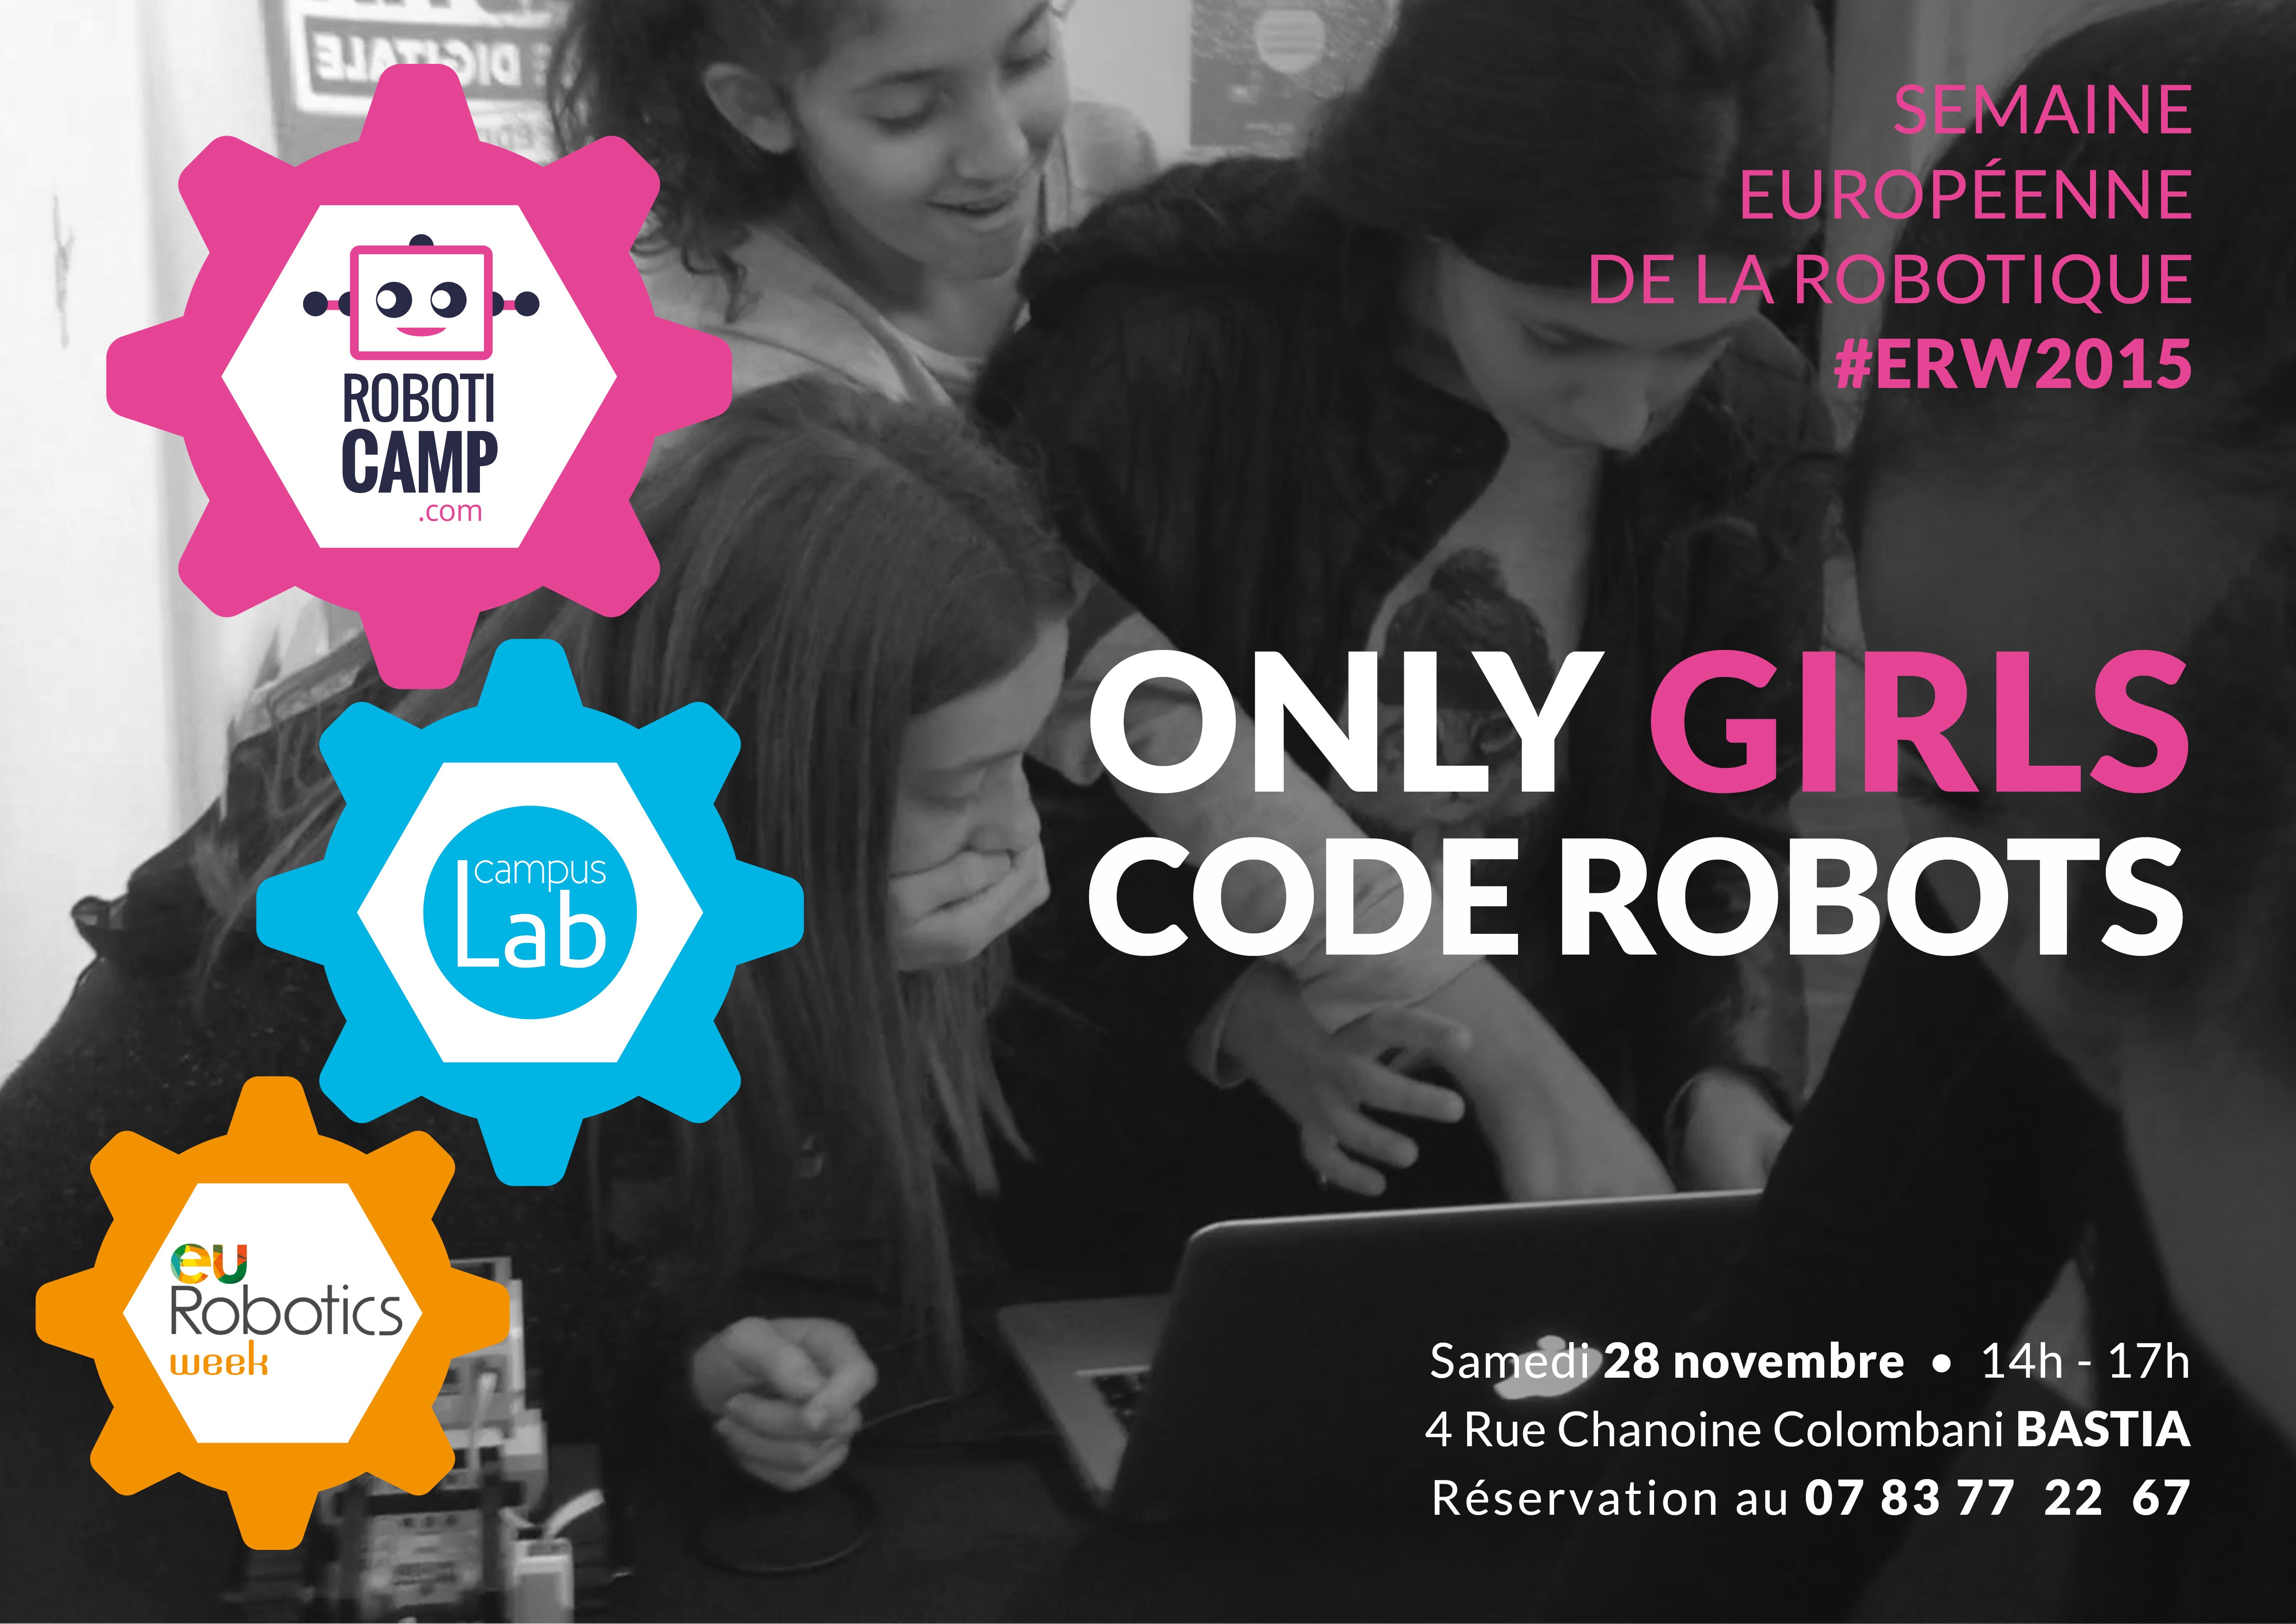 Only Girls Code Robots